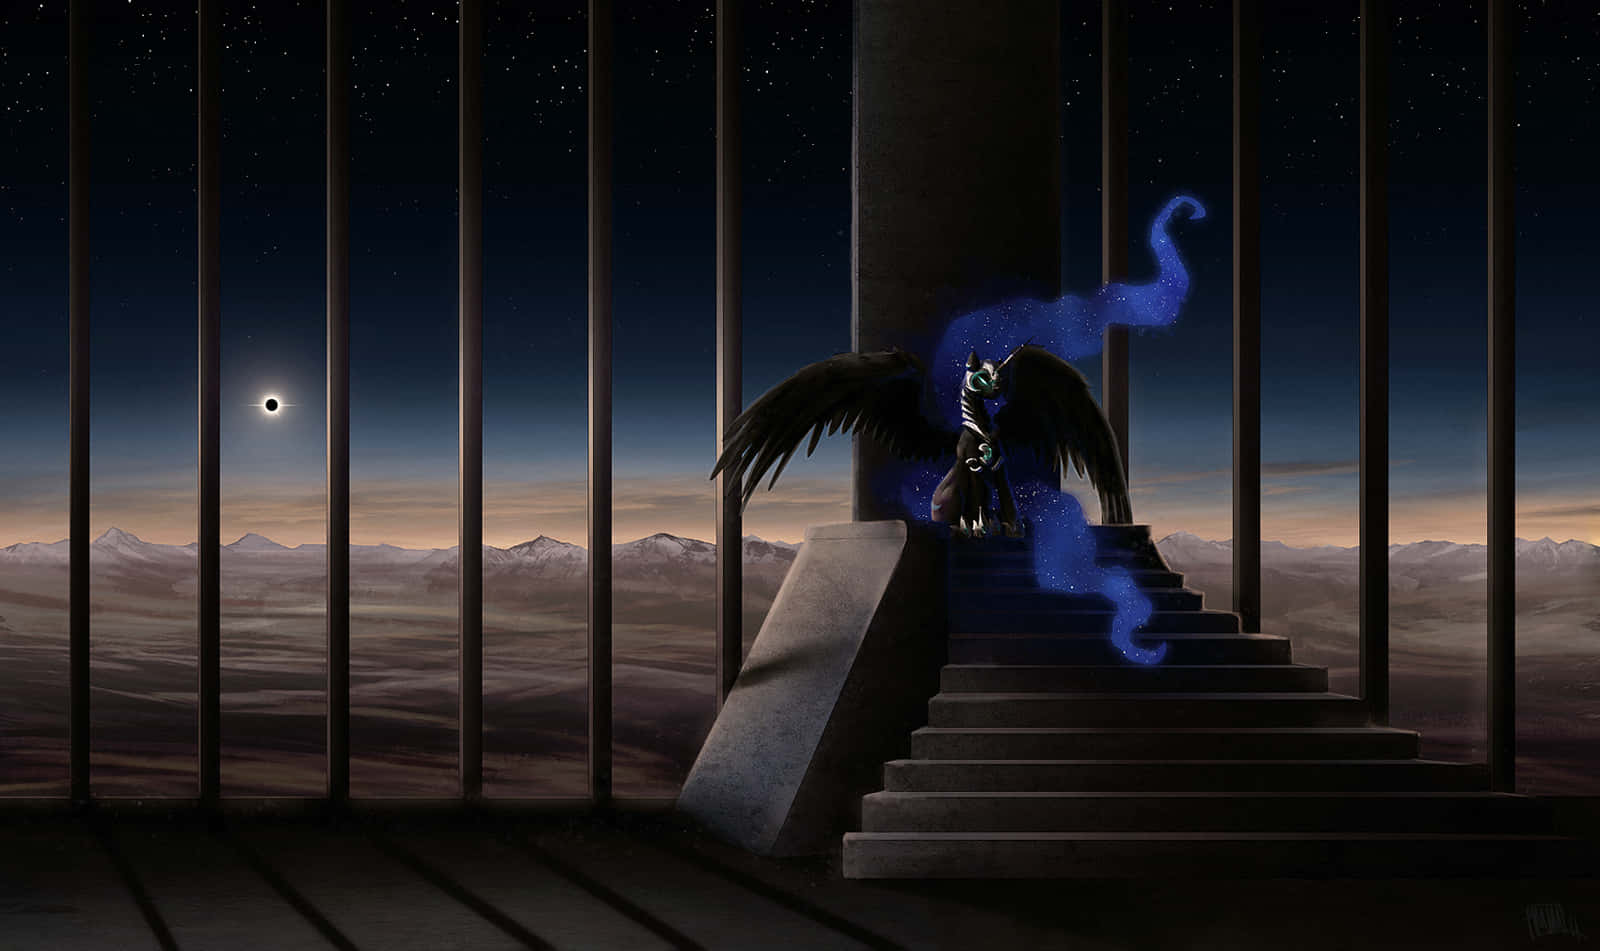 A Blue Dragon Sitting On A Stairway With A Blue Sky Wallpaper